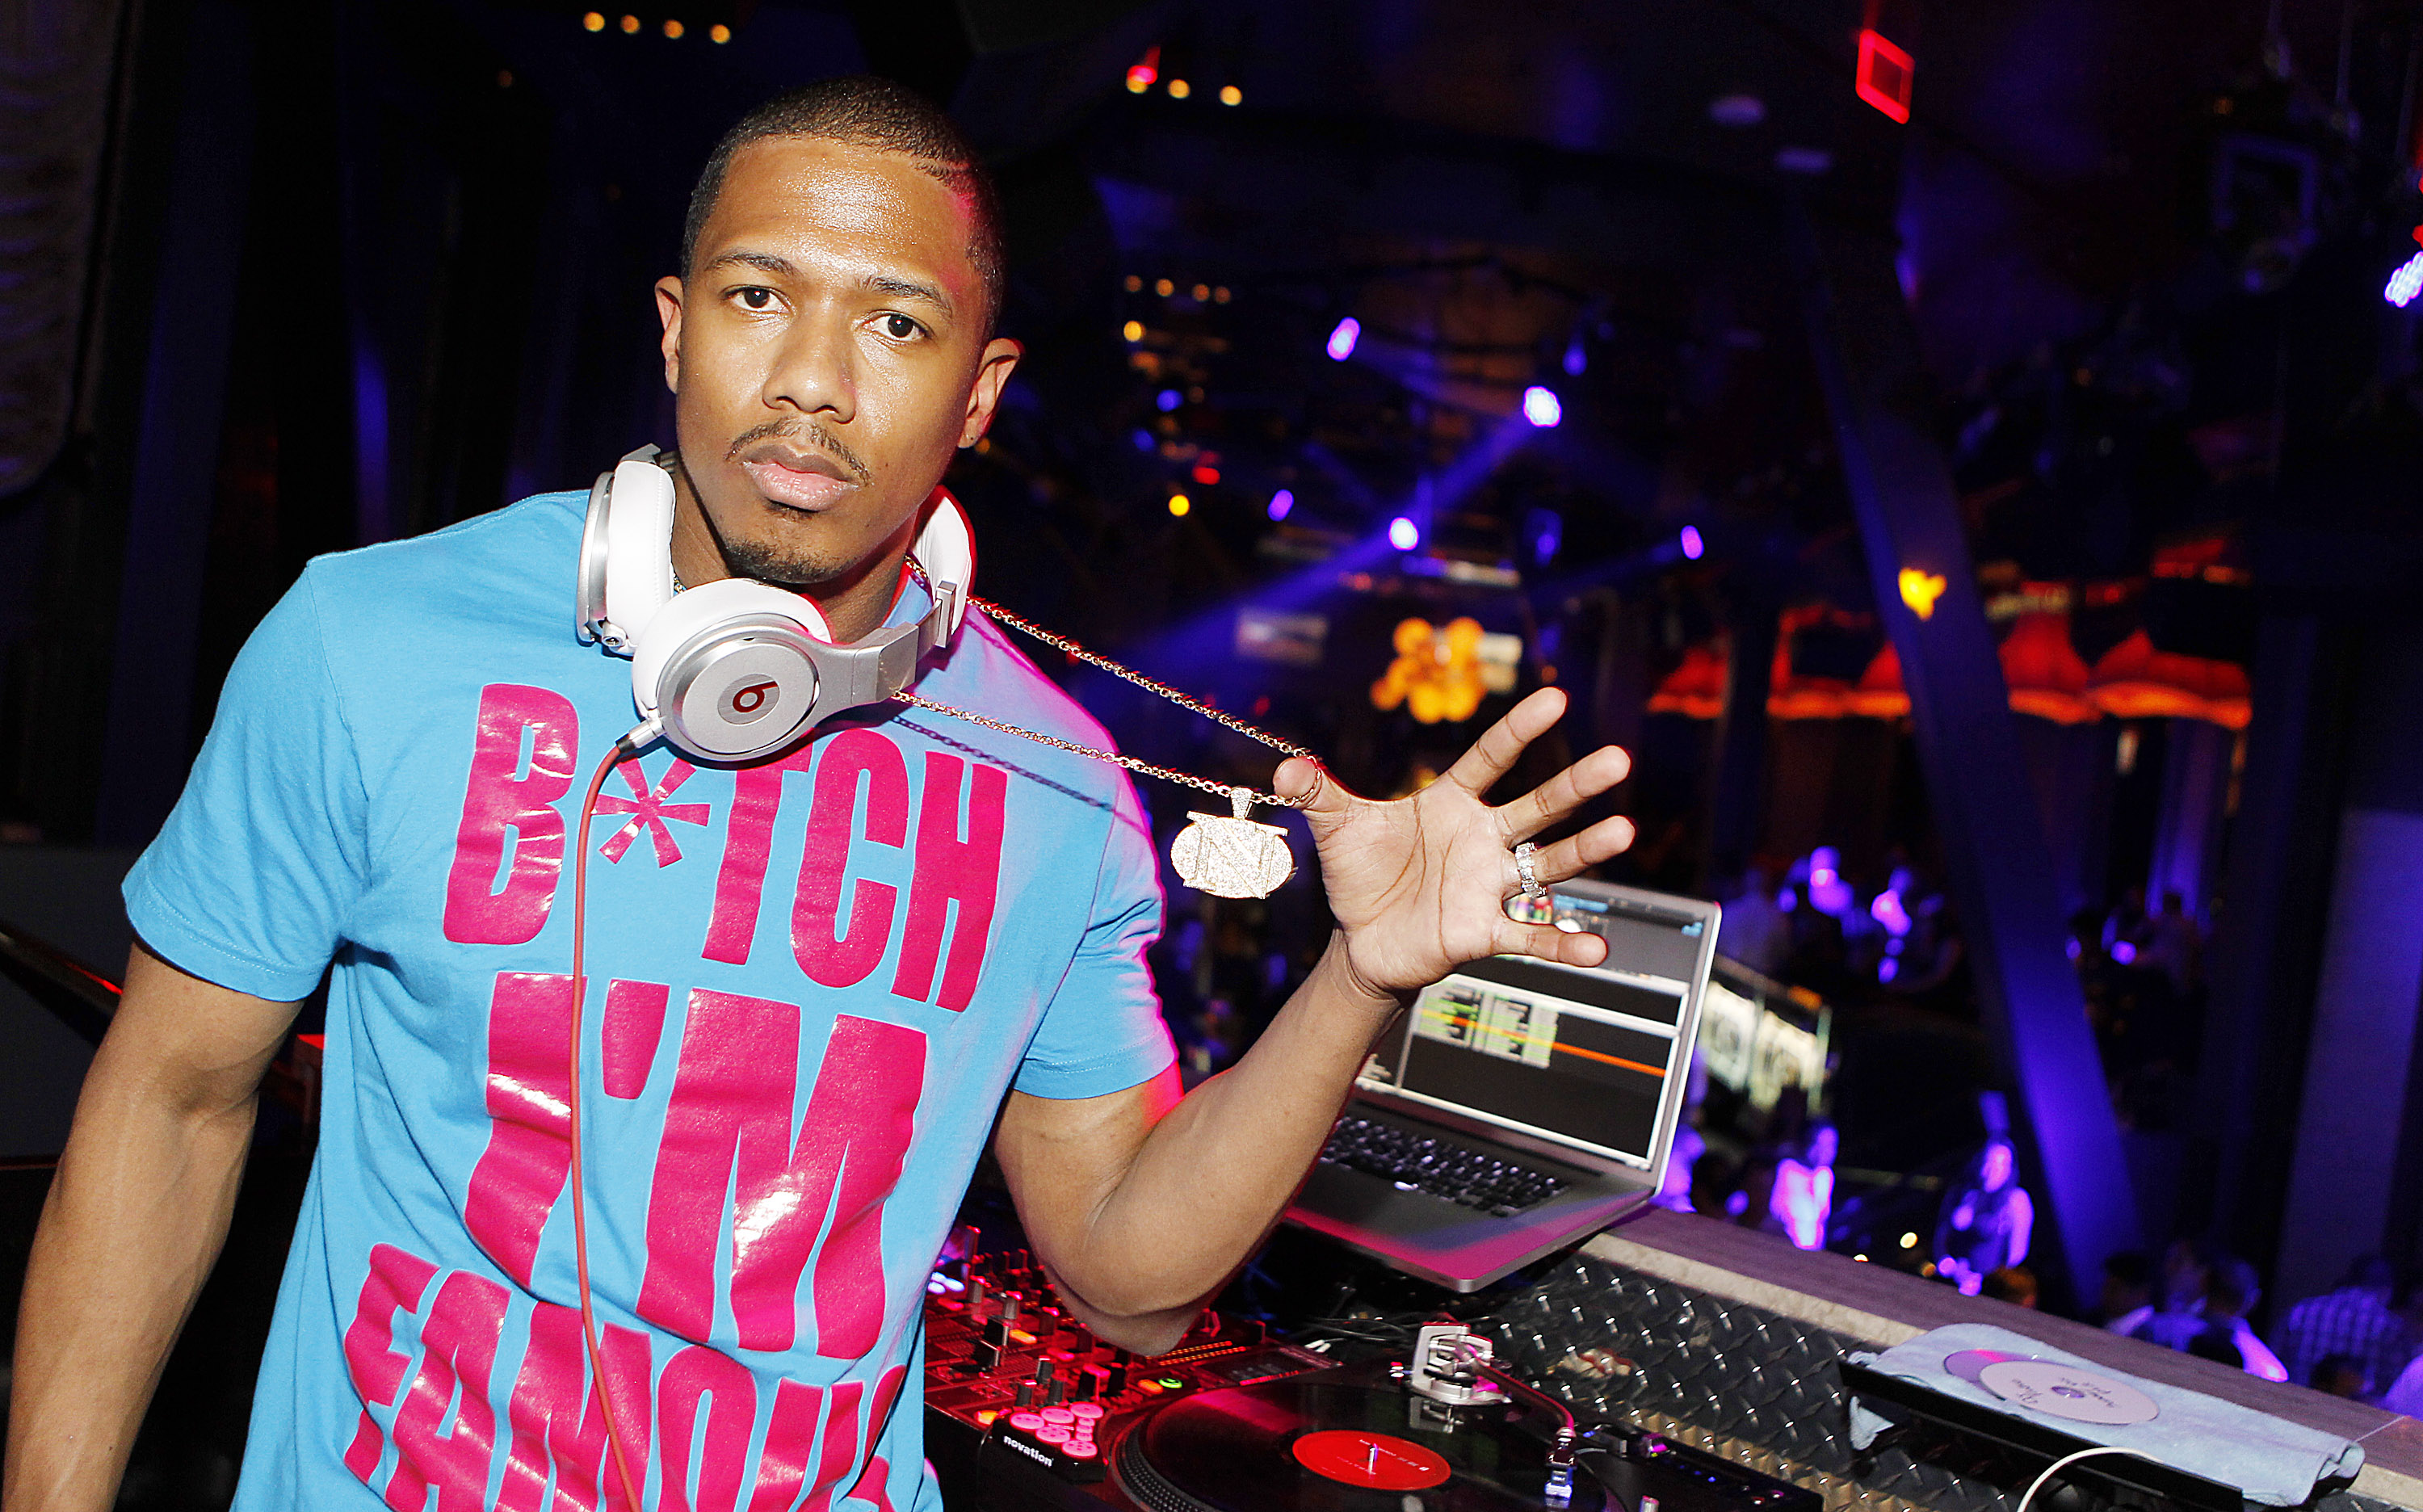 Nick Cannon getting ready to release EDM album titled "White People Pa...